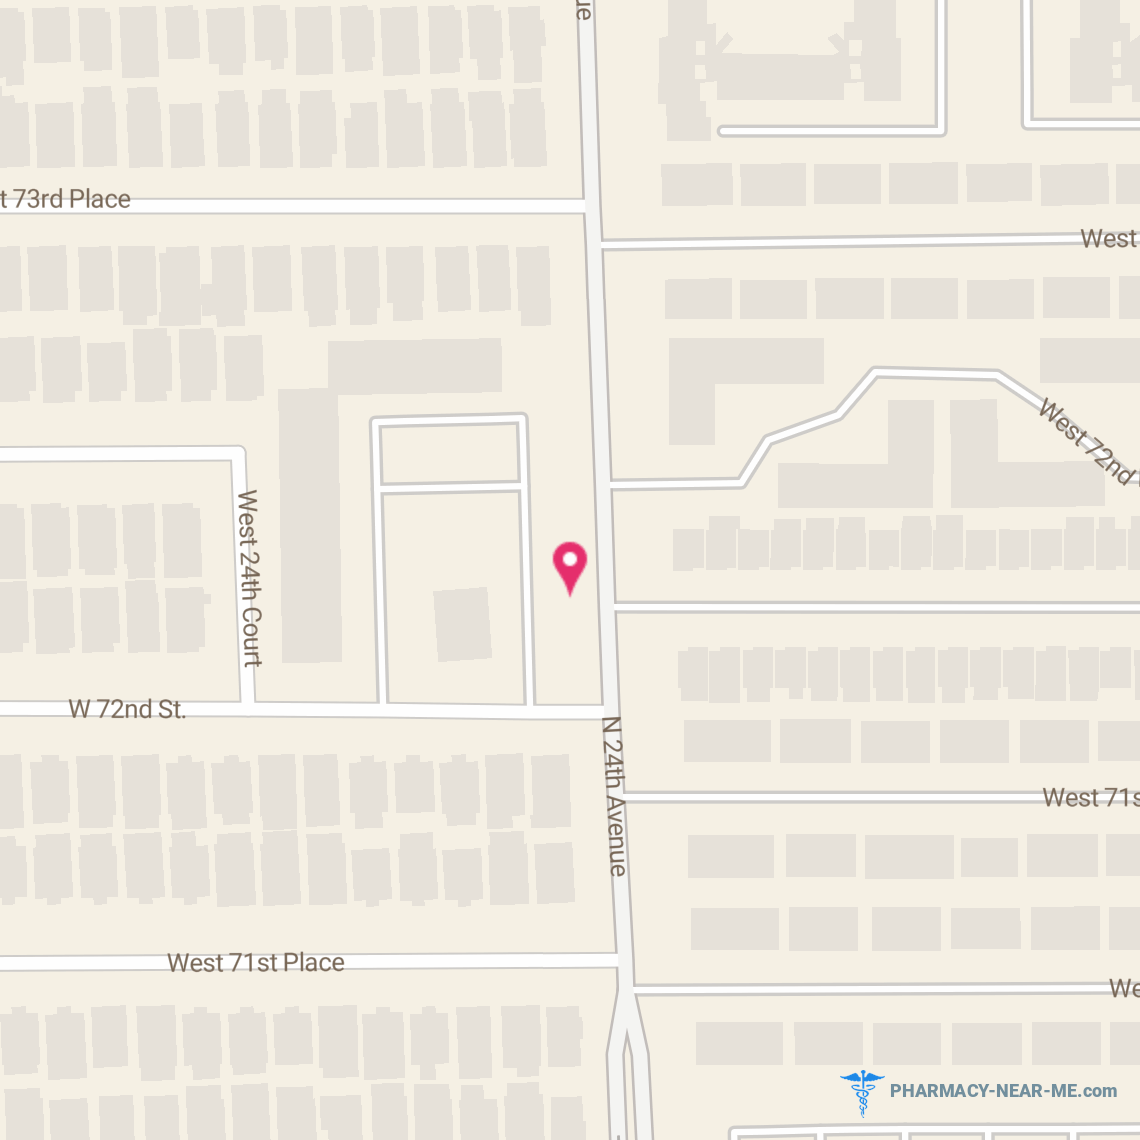 HELP PHARMACY - Pharmacy Hours, Phone, Reviews & Information: 7250 W 24th Ave, Hialeah, Florida 33016, United States